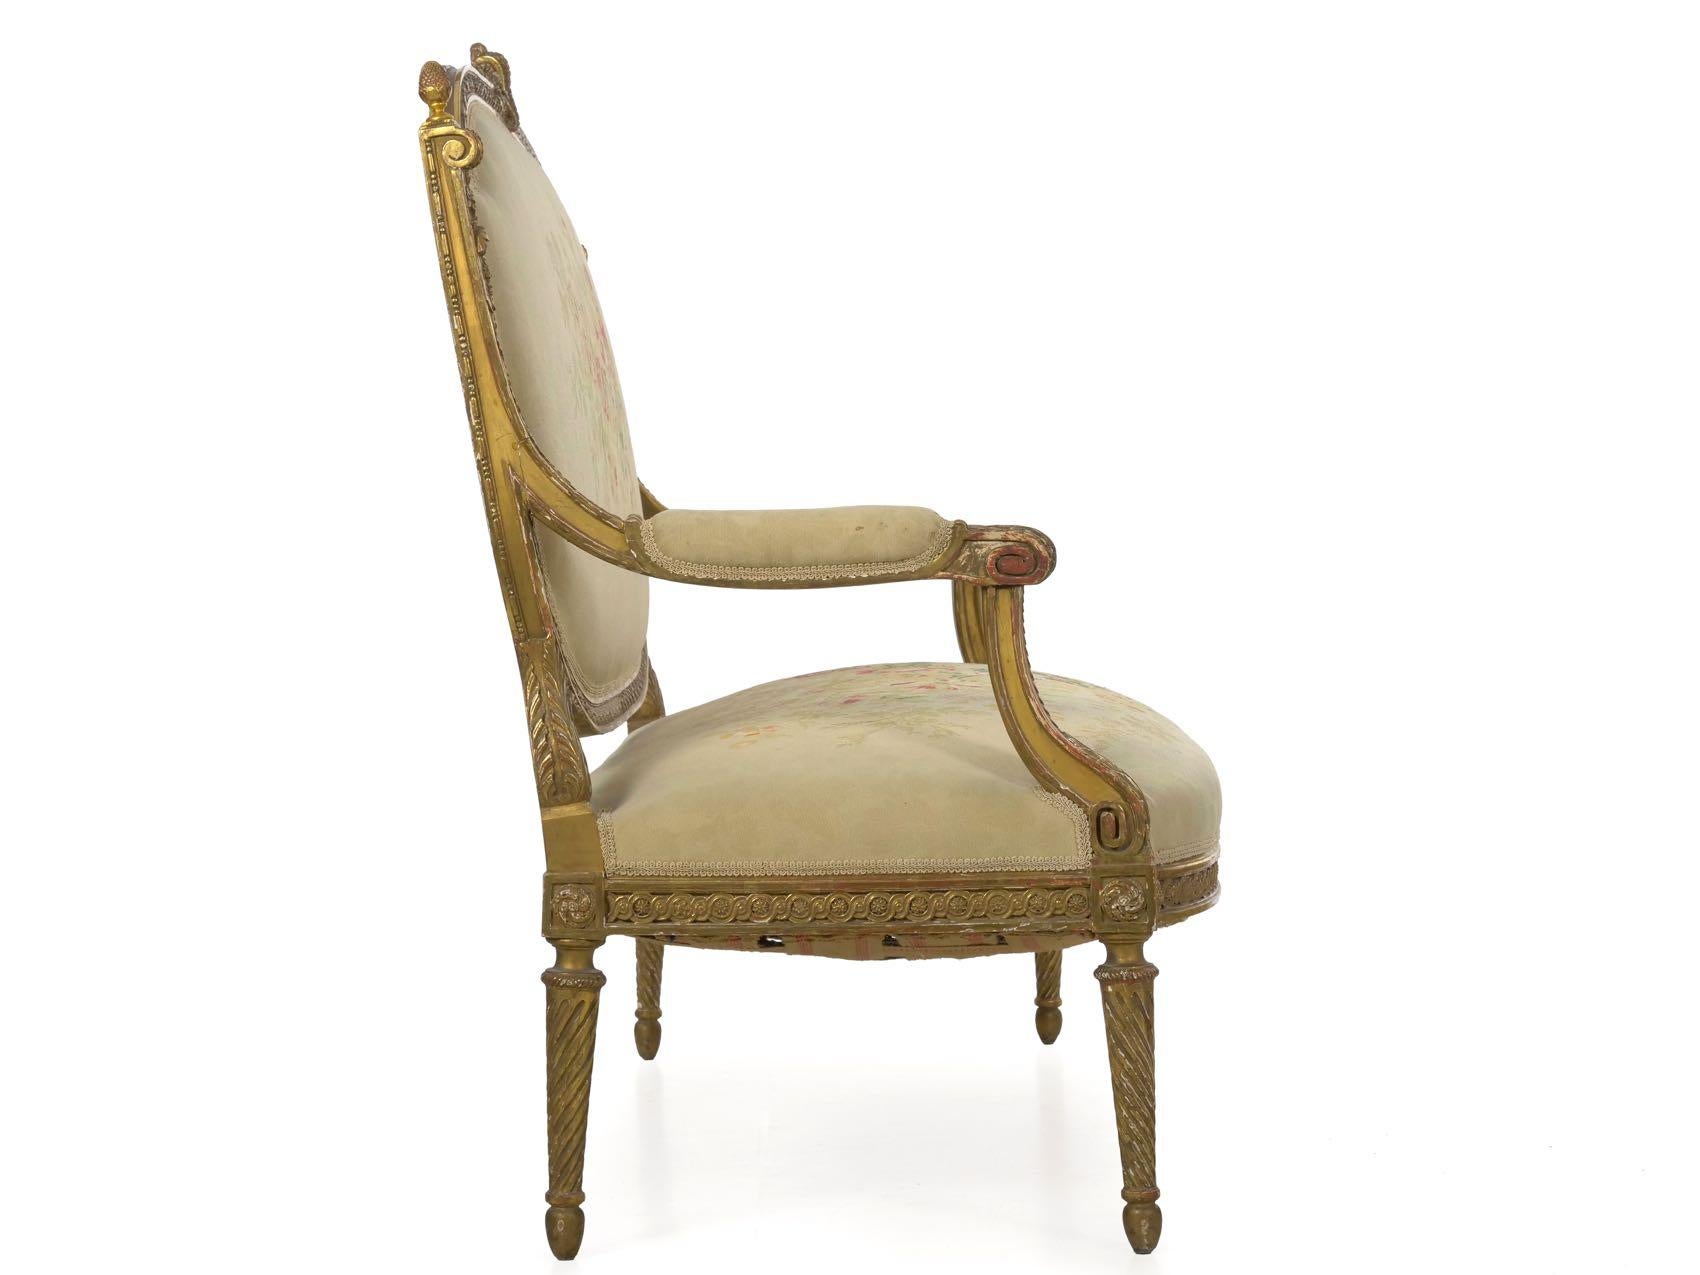 Beautifully carved and gilded, this striking Belle Époque settee is crafted in the typical manner of the Louis XVI taste during the fourth quarter of the 19th century. Tight infinite swirls and motifs of acanthus and foliage are tastefully developed